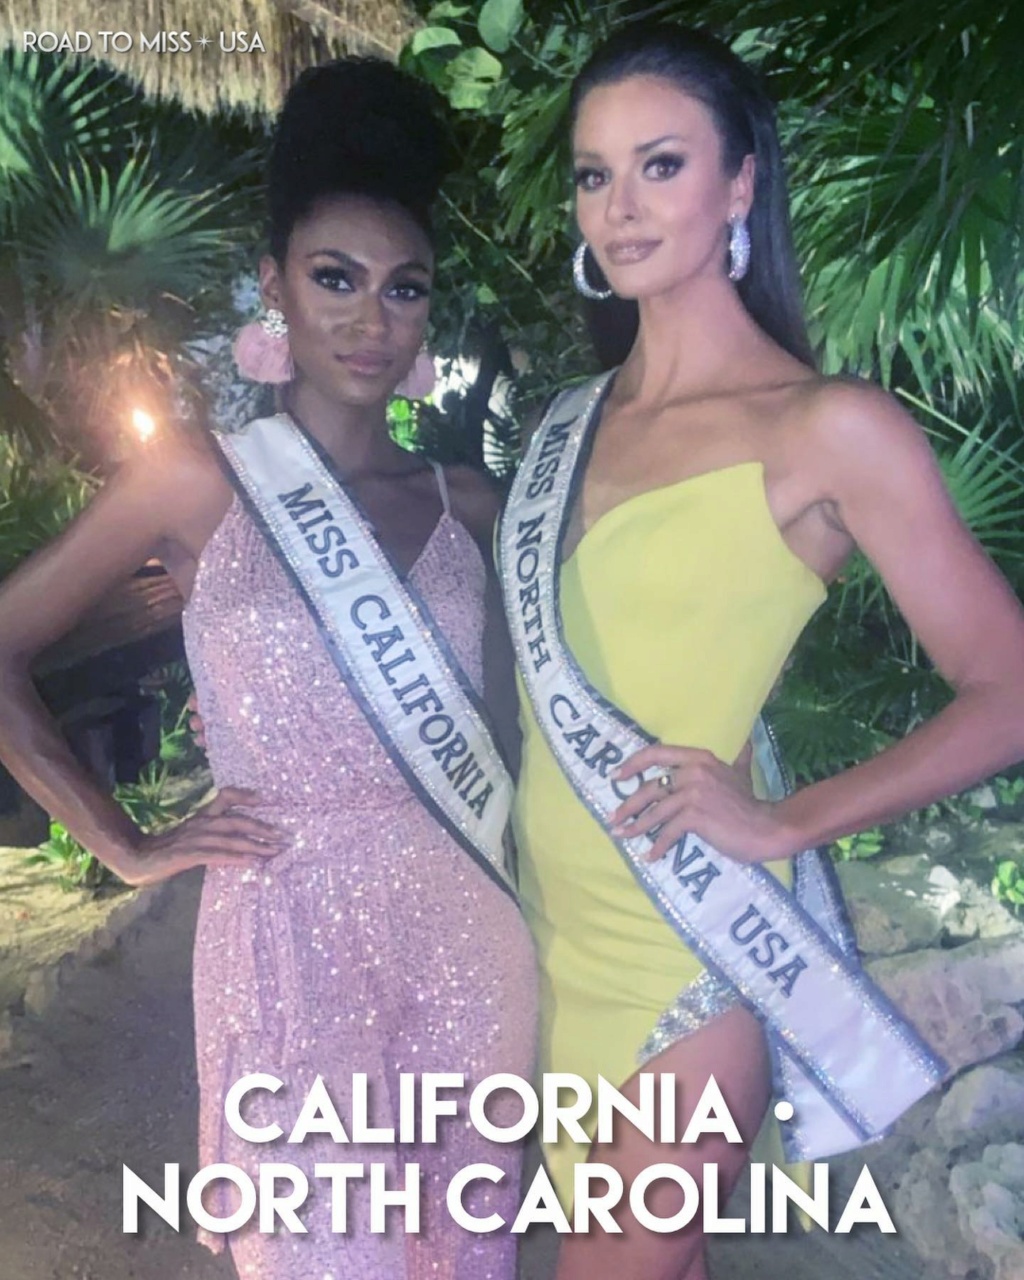 ROAD TO MISS USA 2021 is KENTUCKY! - Page 3 24204813